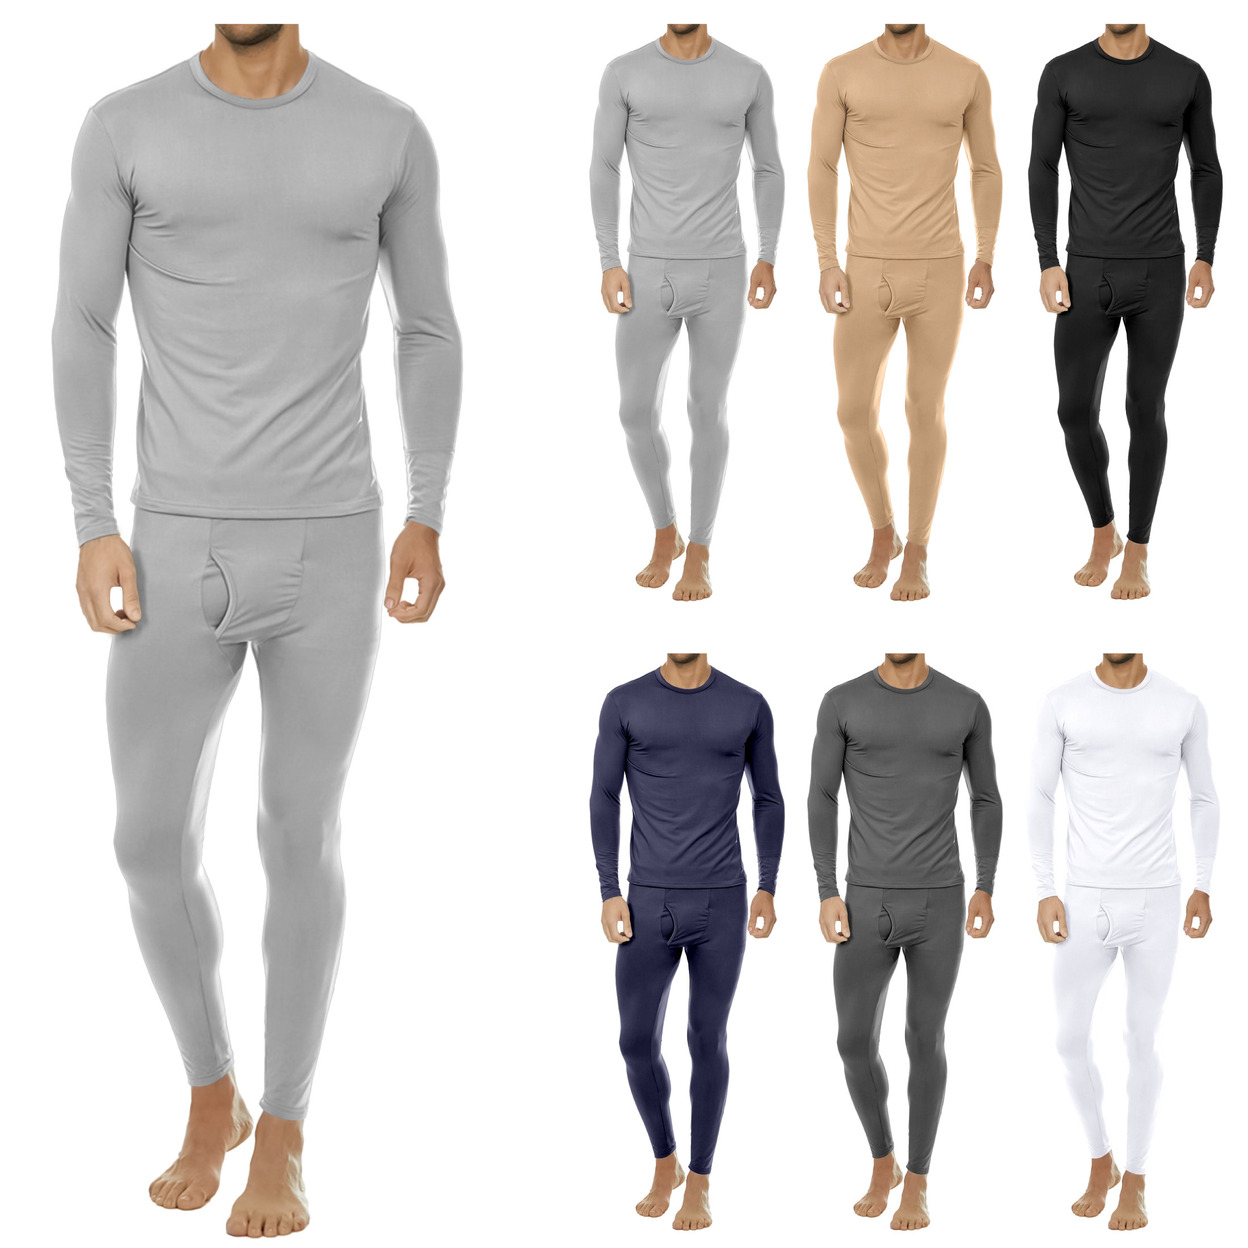 2-Sets: Men's Winter Warm Fleece Lined Thermal Underwear Set For Cold Weather - Grey&white, Xx-large